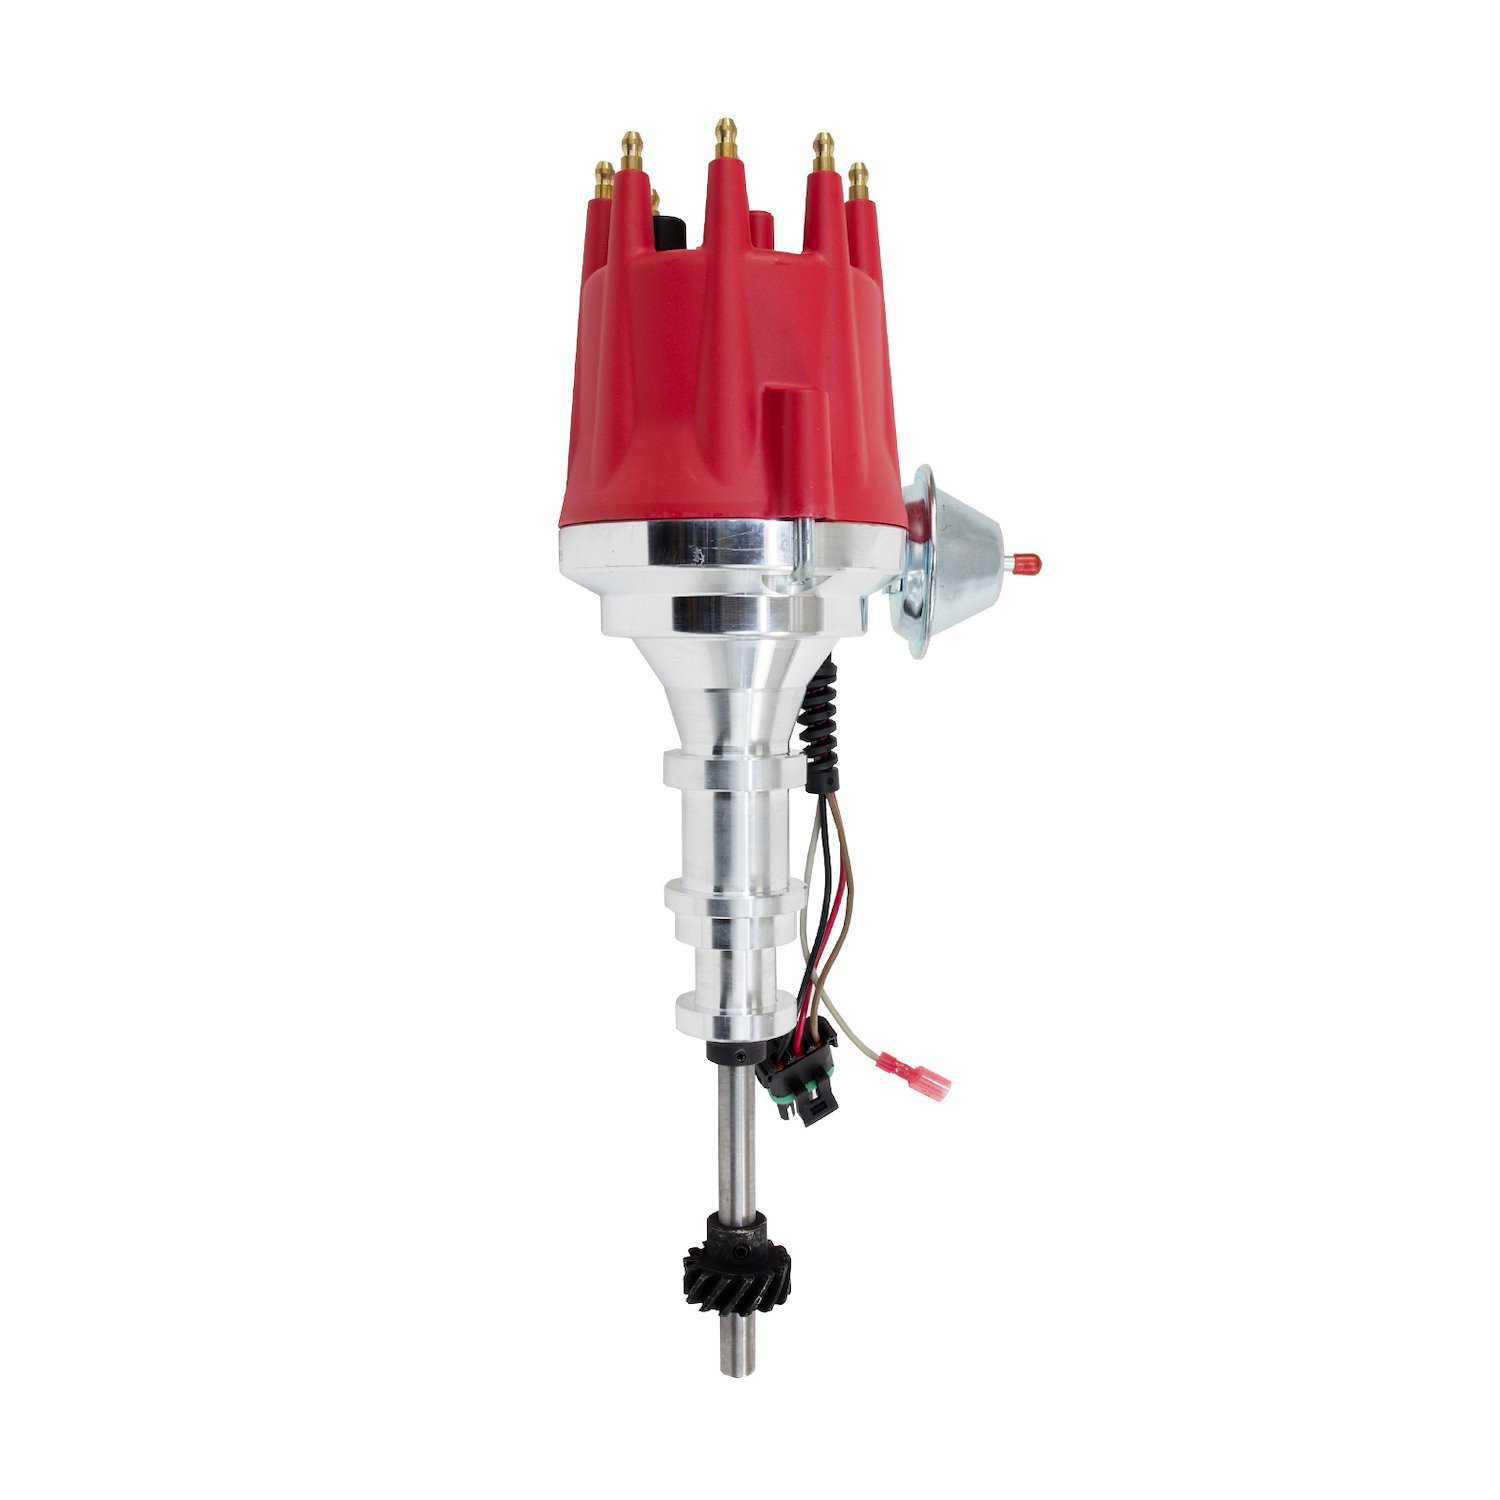 JM7742R Pro Series Ready-to-Run Distributor, Ford Y Block (239-312), Red